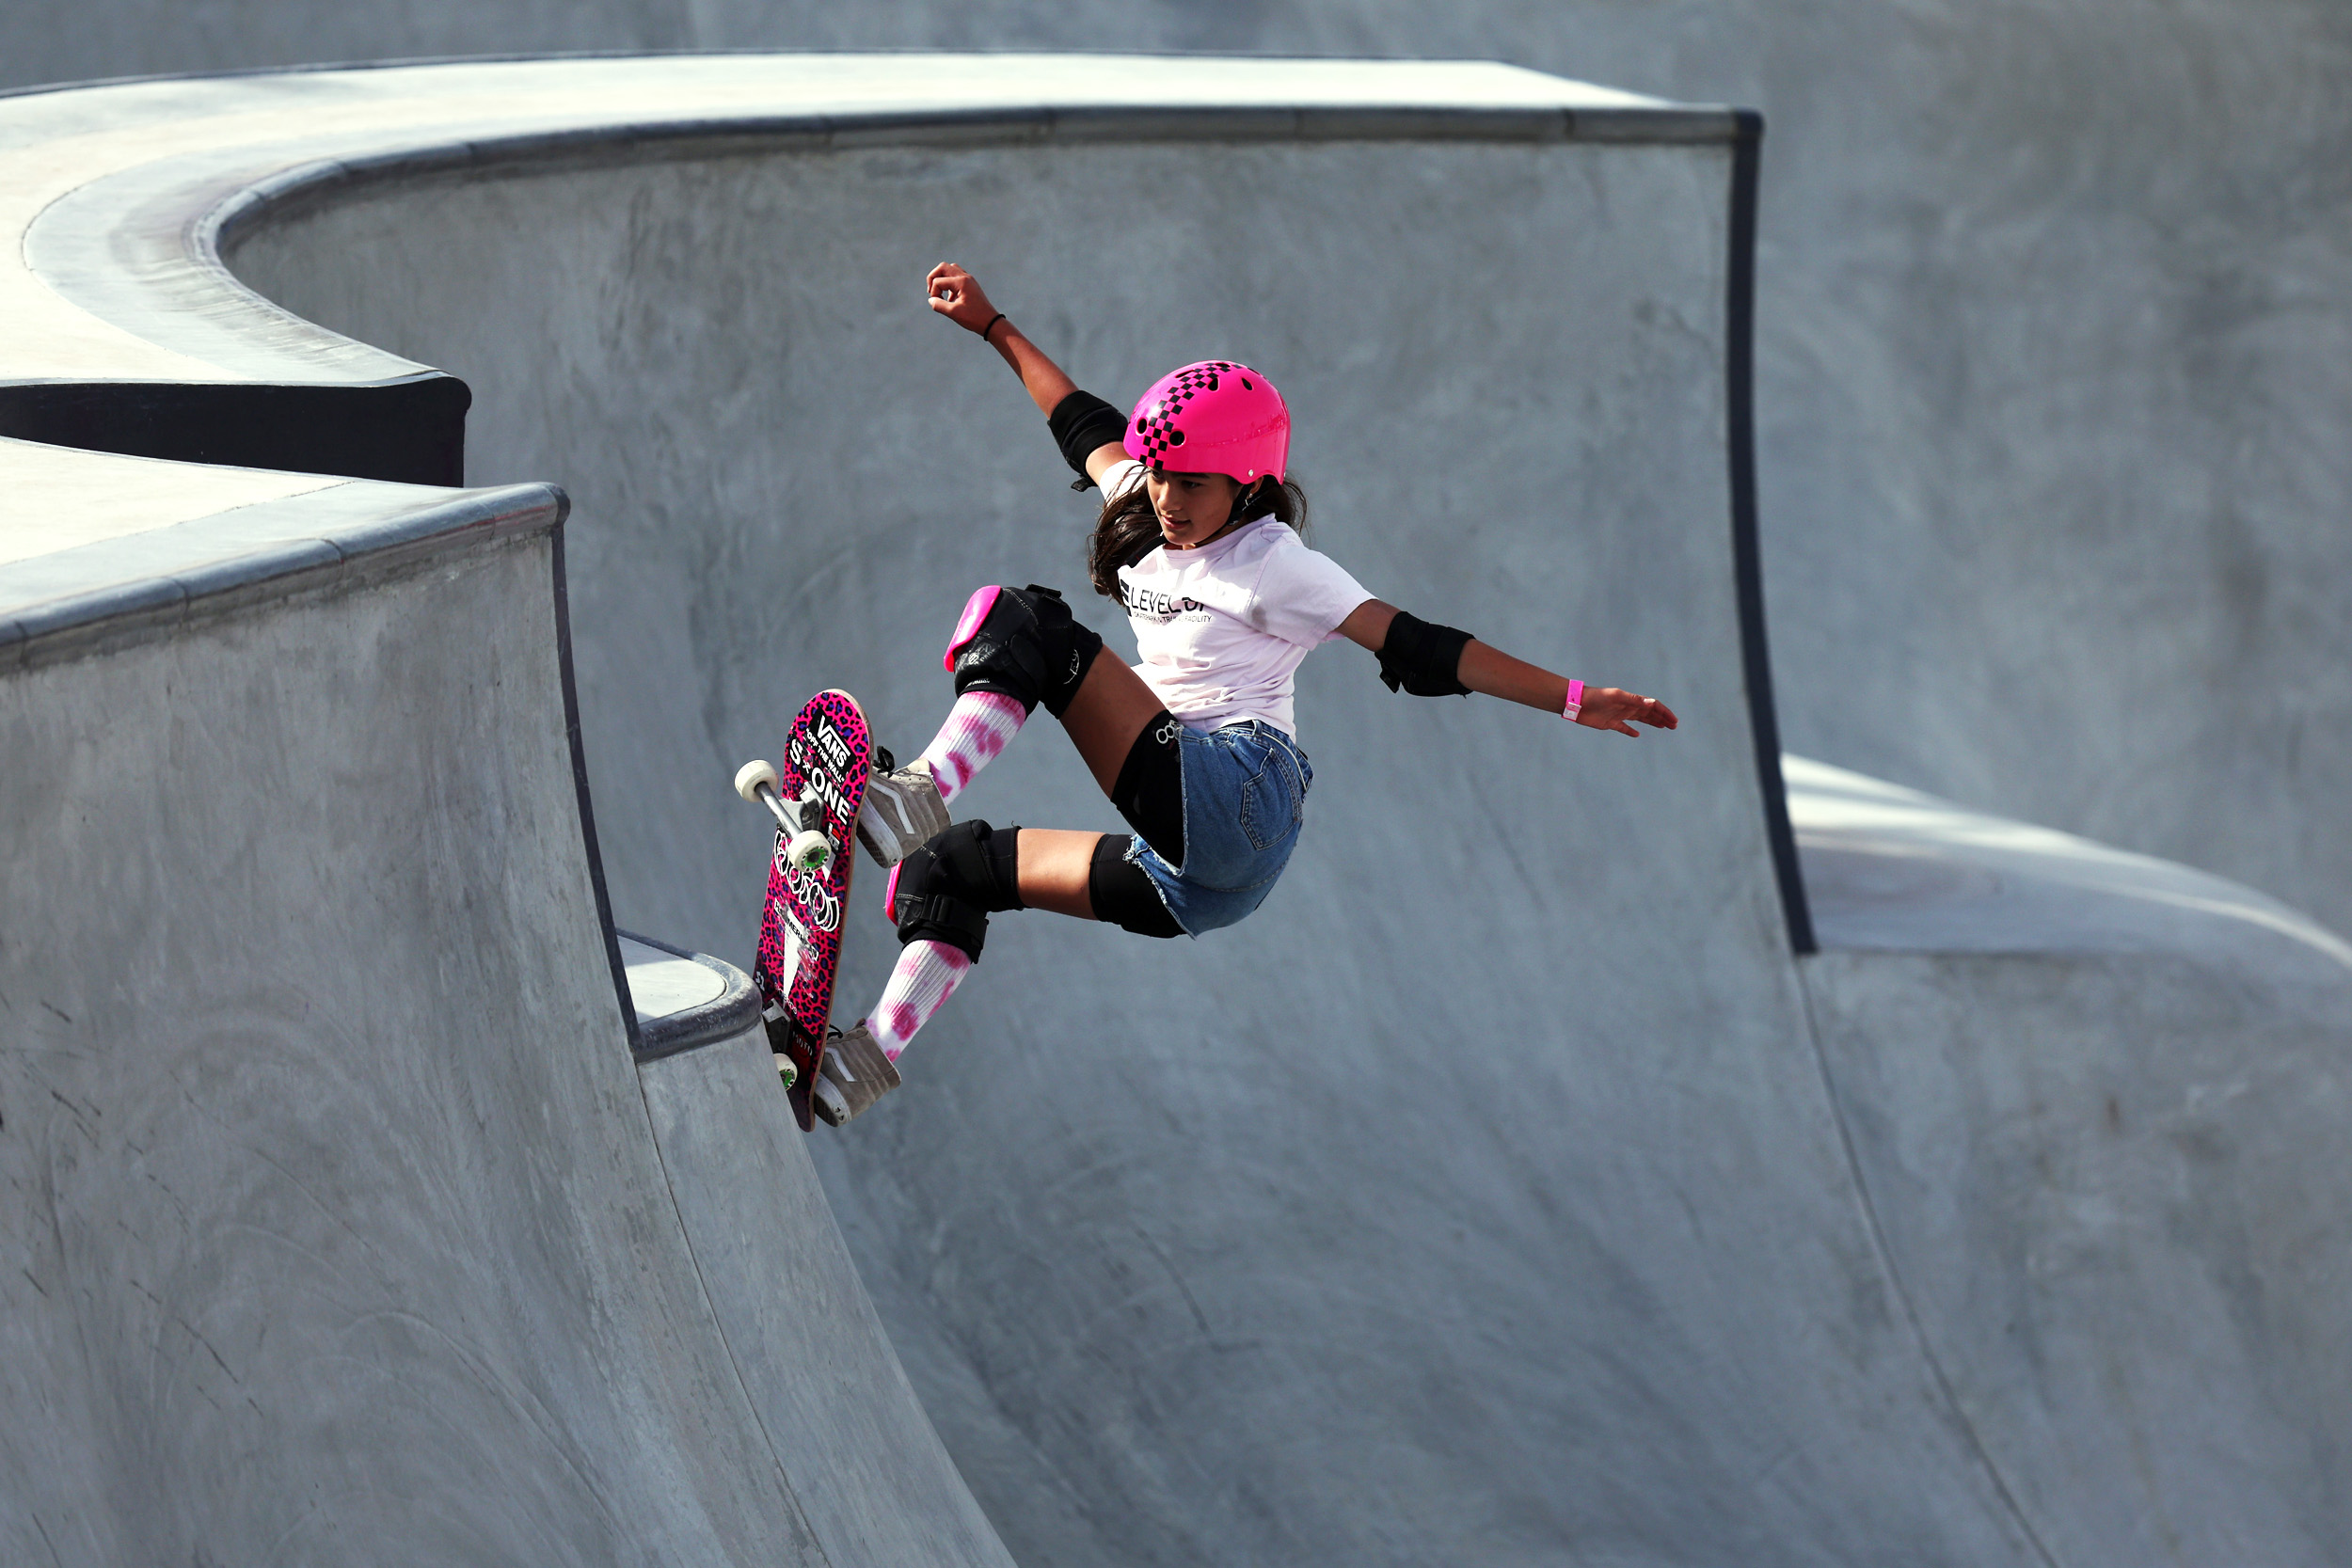 13-year-old Australian Girl Becomes First Female To Pull Off Tony Hawk's '720' Trick